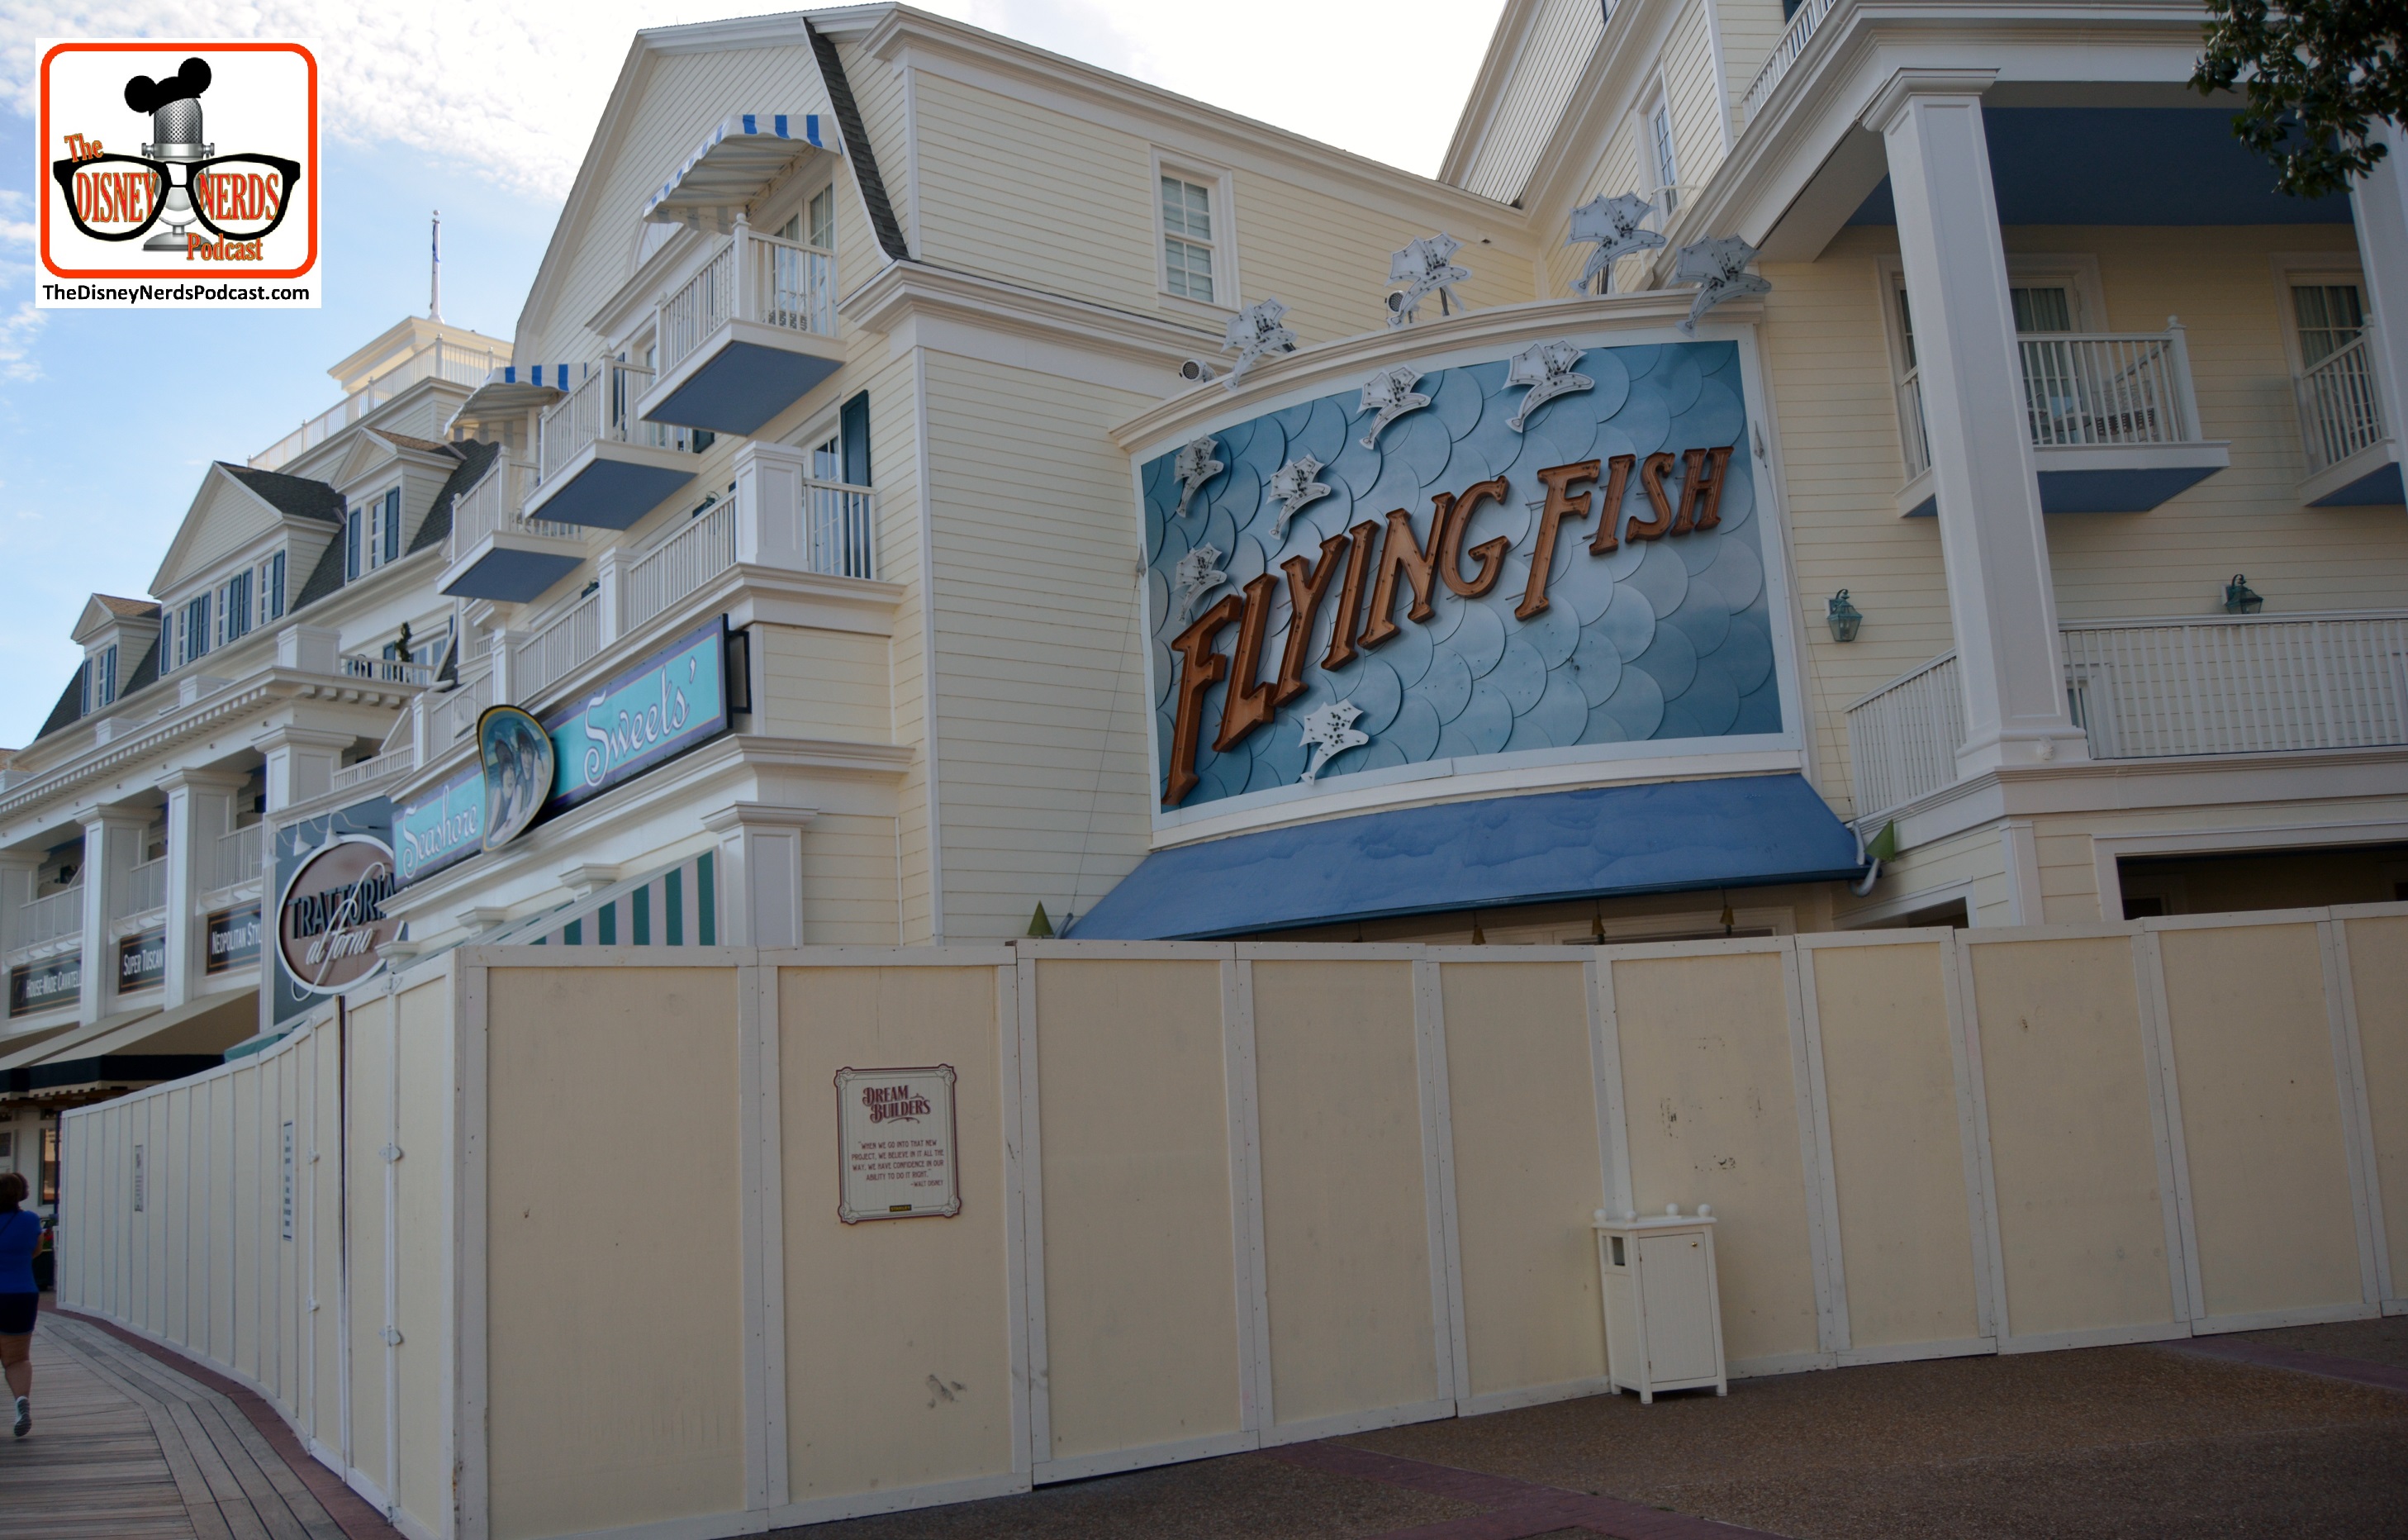 DNP April 2016 Photo Report: Lots of Construction Walls at the Boardwalk Resort. Flying Fish and Seaside Sweets are behind walls